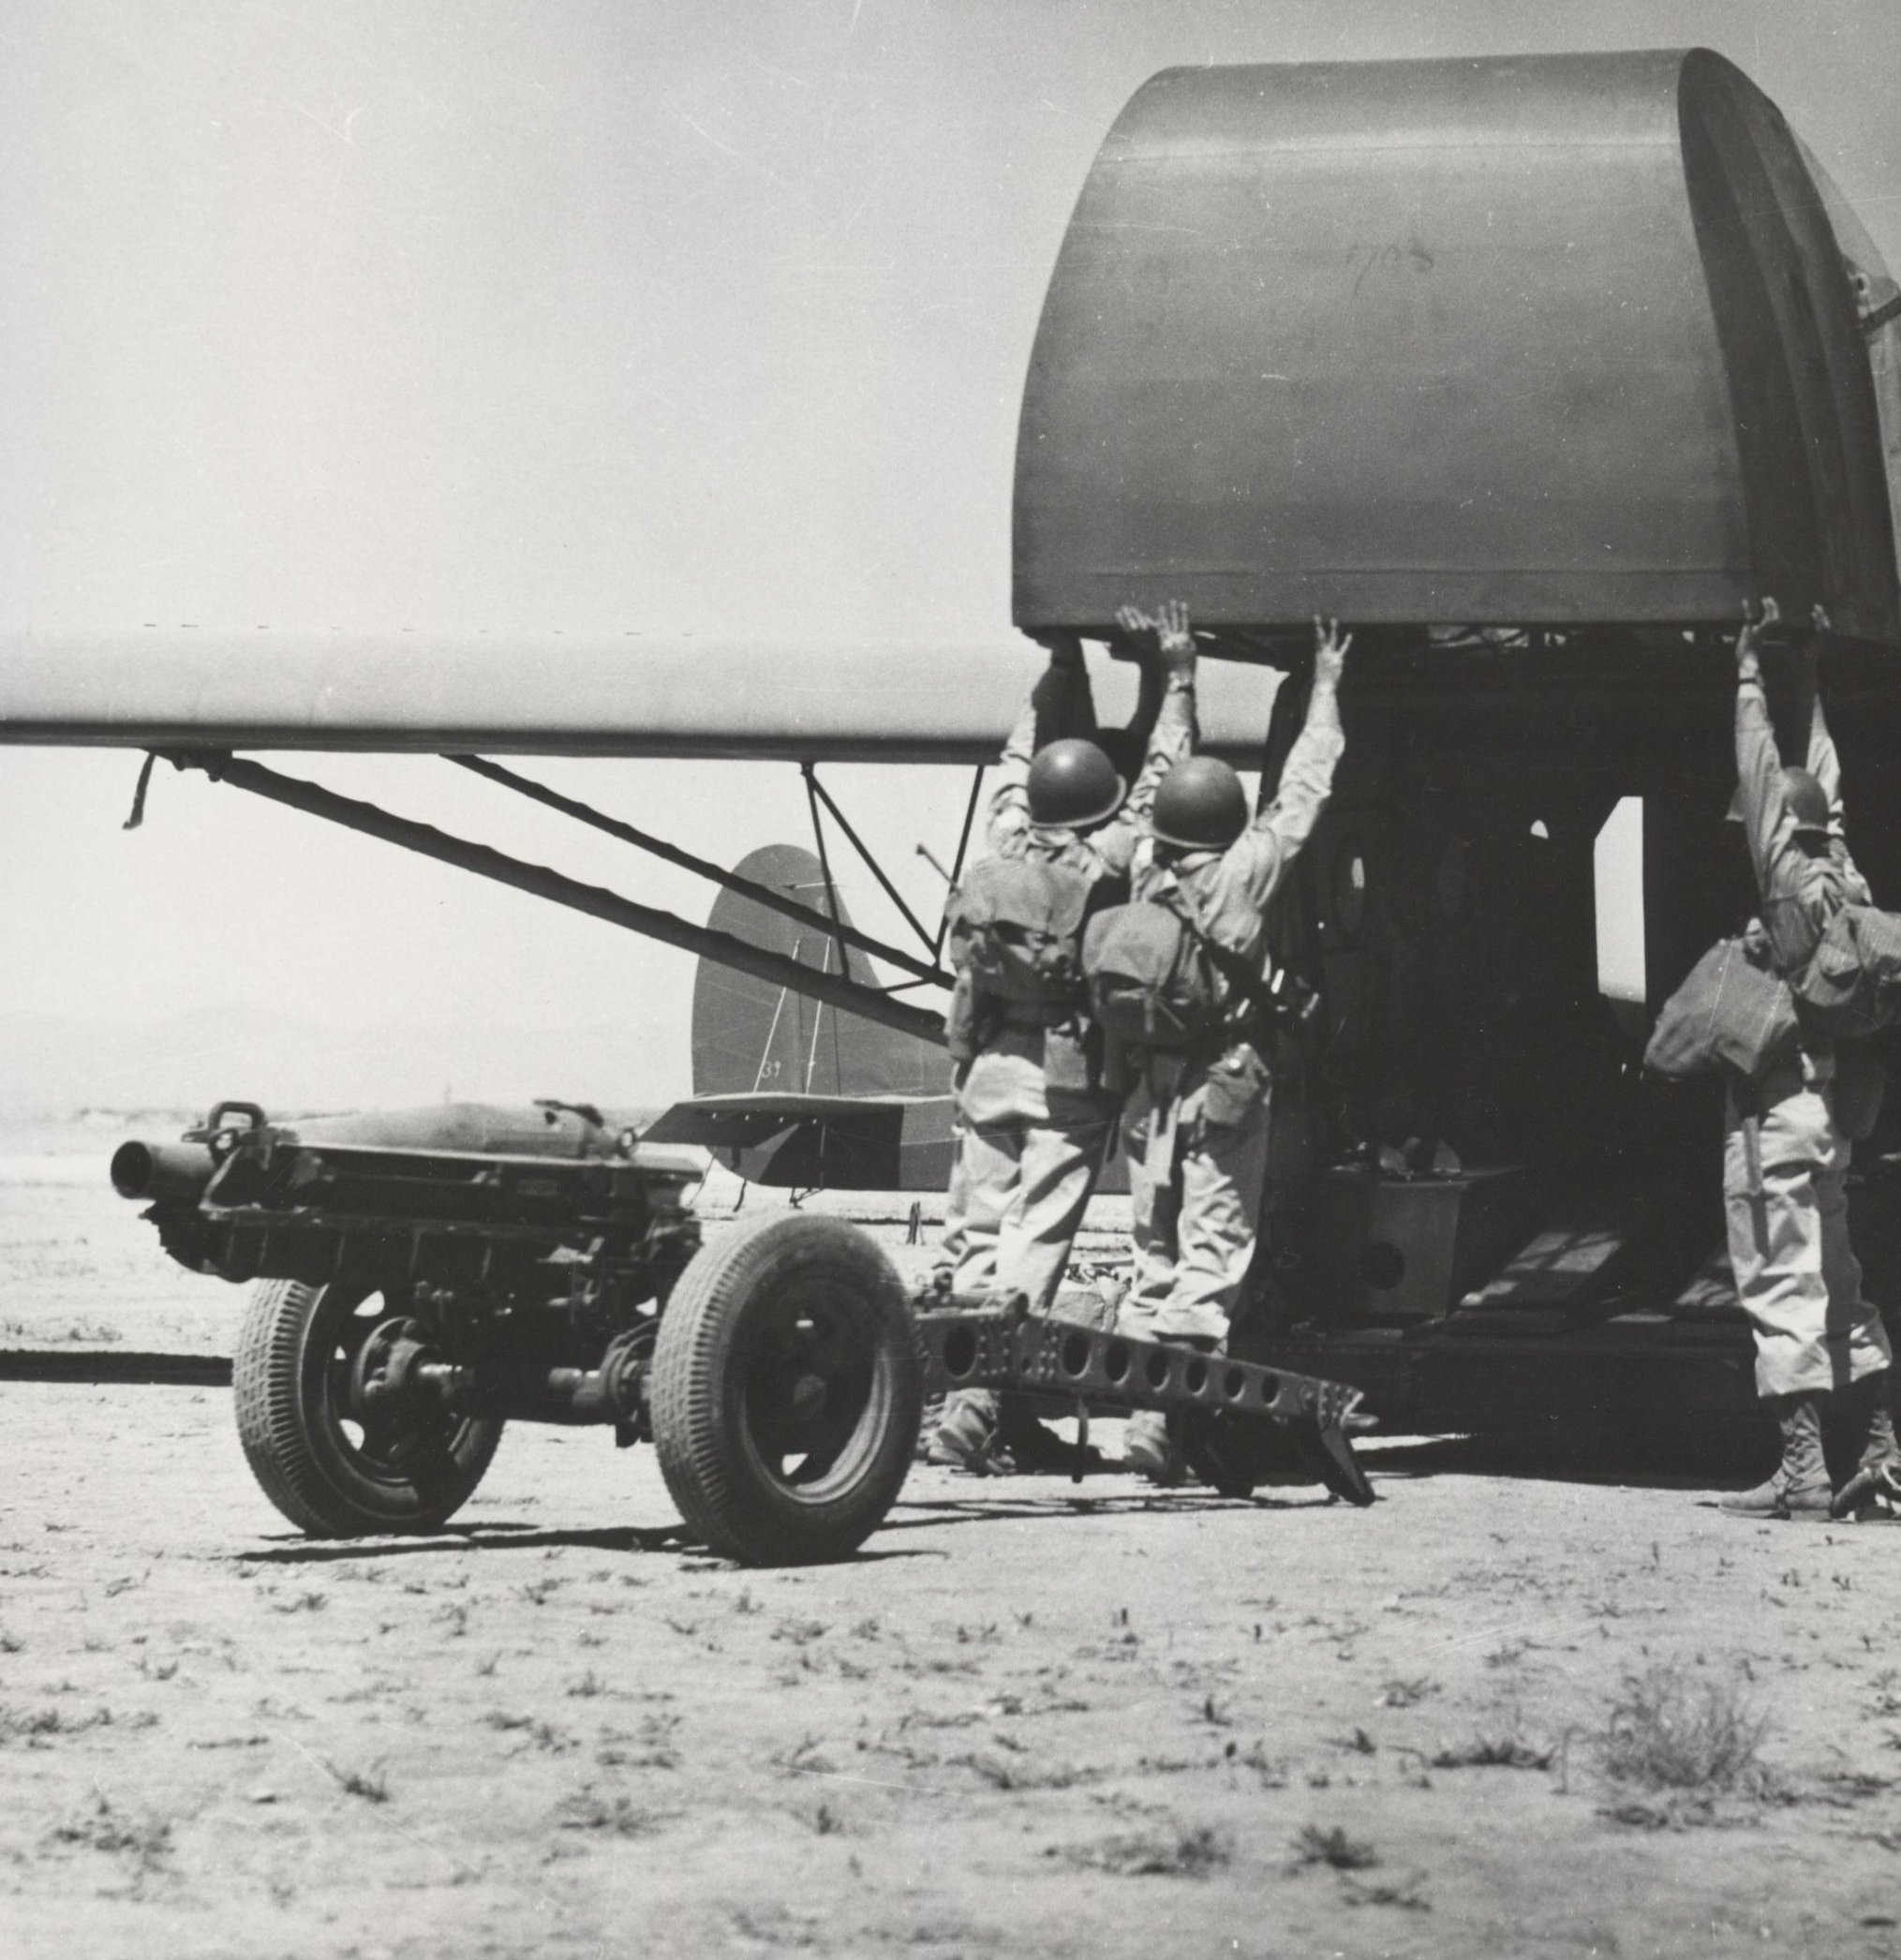 82nd Airborne load a 75mm howitzer into a CG-4A Troop Glider during training at Oujda, French Morocco, North Africa a month before the Sicily invasion, Jun 11 1943.